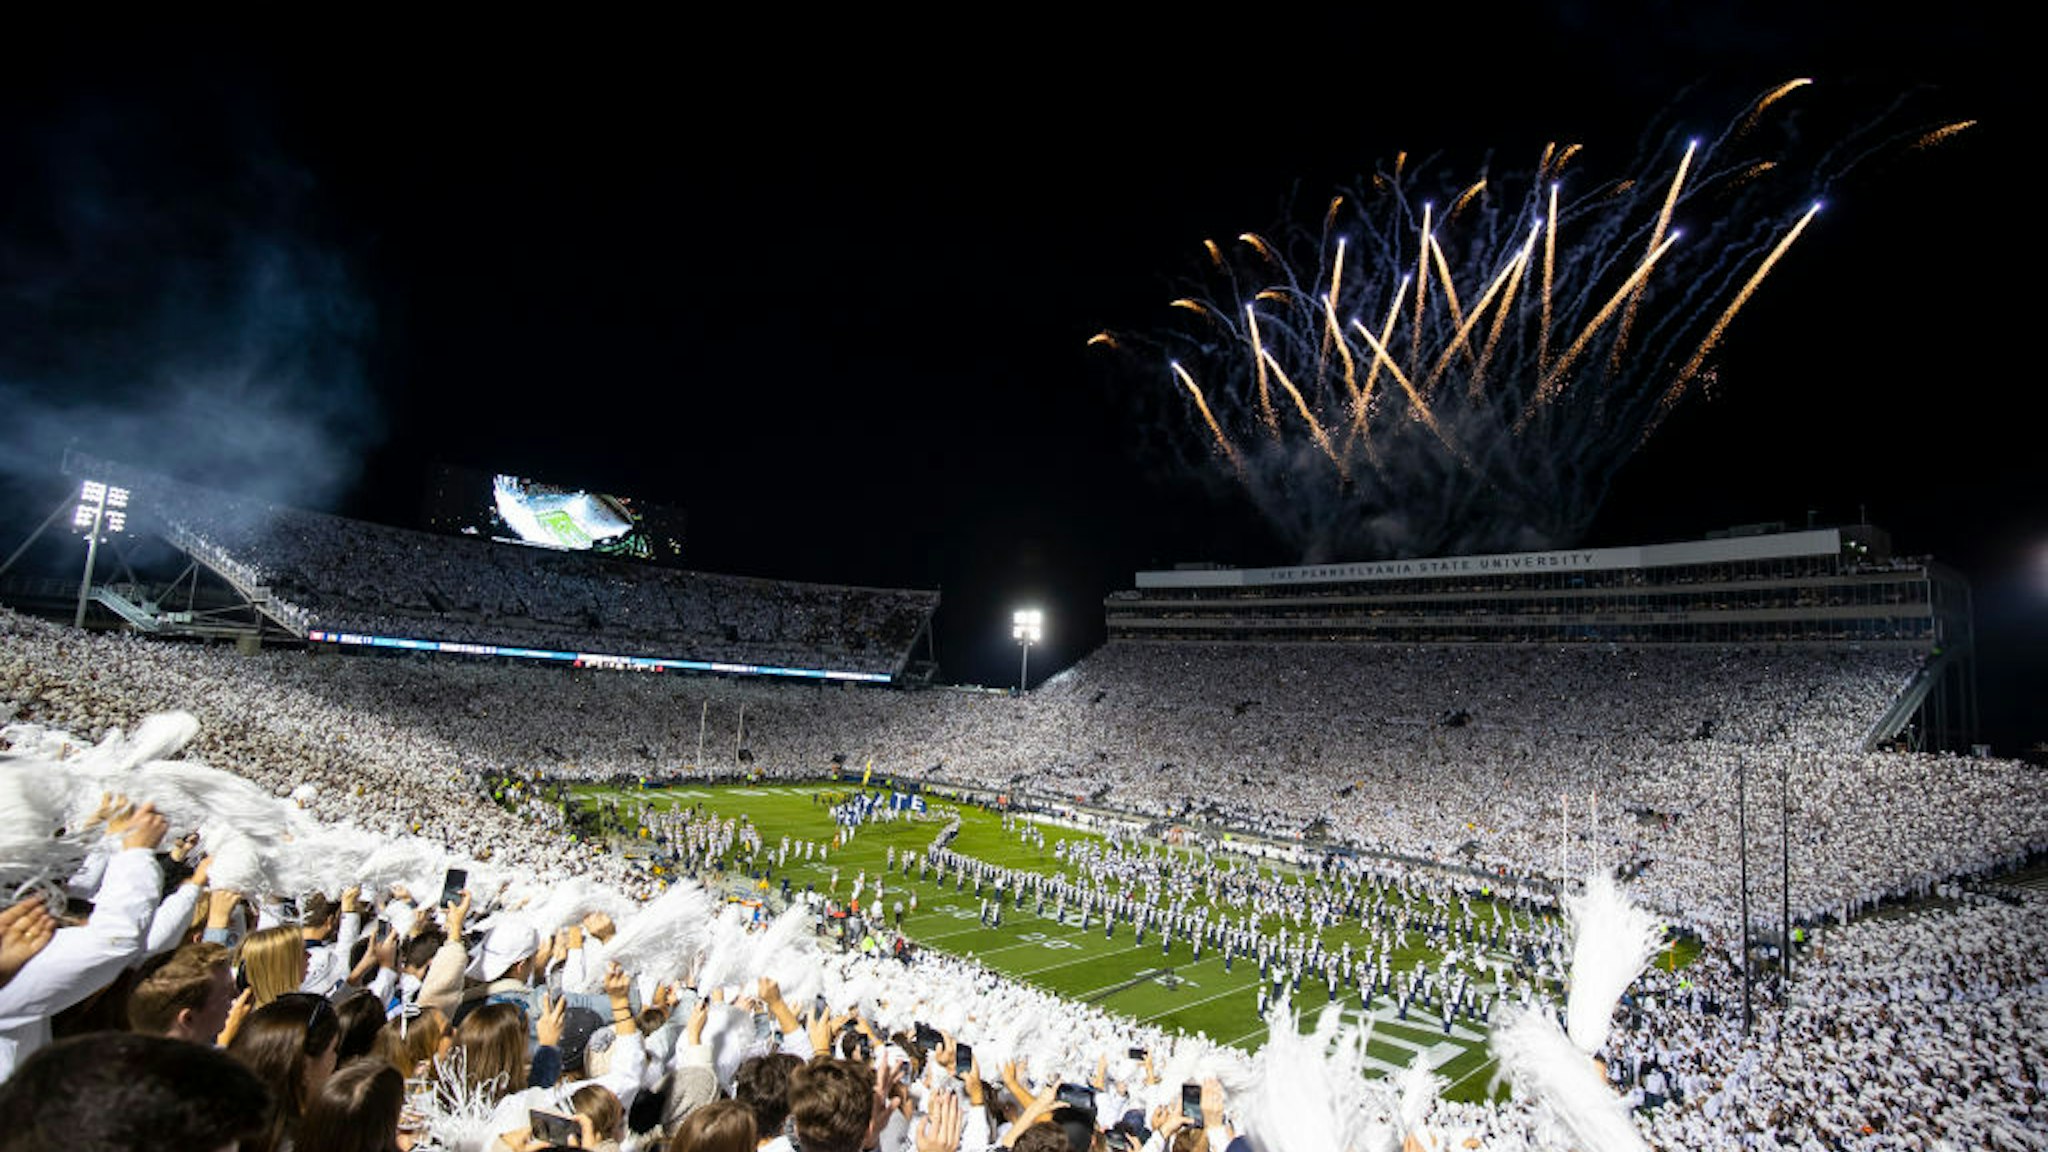 UNIVERSITY PARK, PA - OCTOBER 19: General view before the white out game between the Penn State Nittany Lions and the Michigan Wolverines on October 19, 2019 at Beaver Stadium in University Park, Pennsylvania. Penn State defeats Michigan 28-21. (Photo by Brett Carlsen/Getty Images)